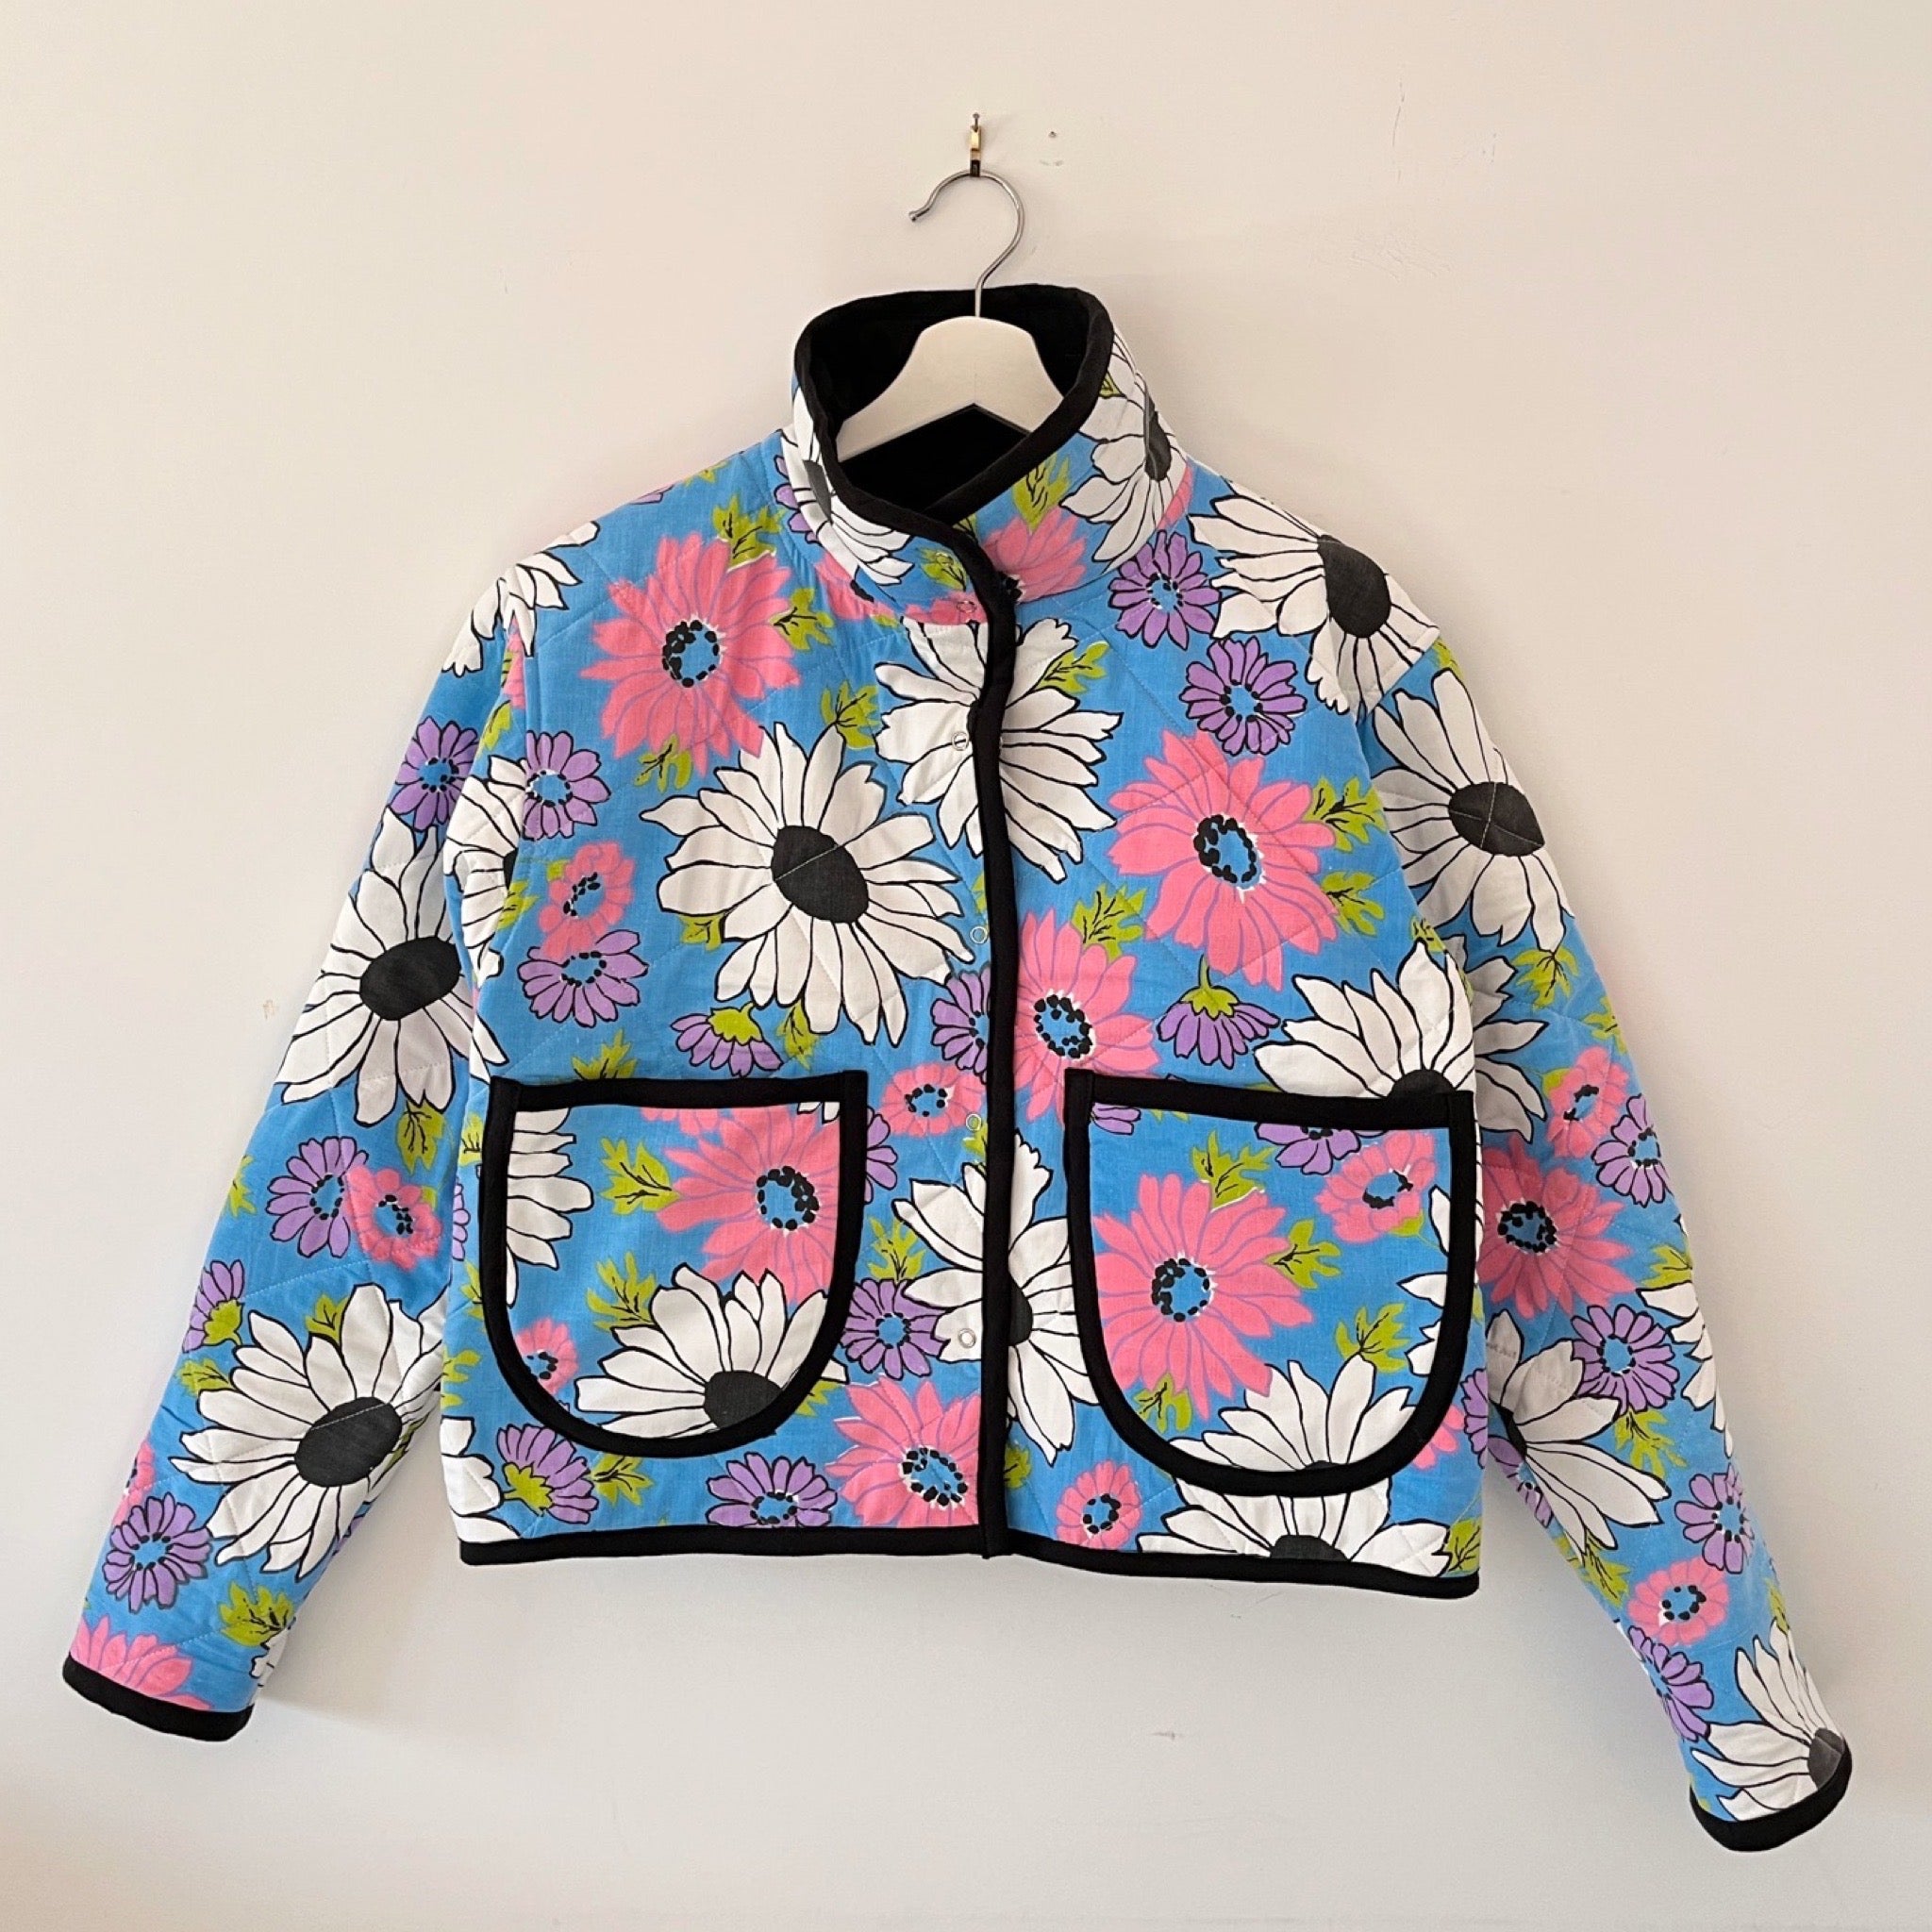 OOAK quilted jacket made from vintage floral cotton